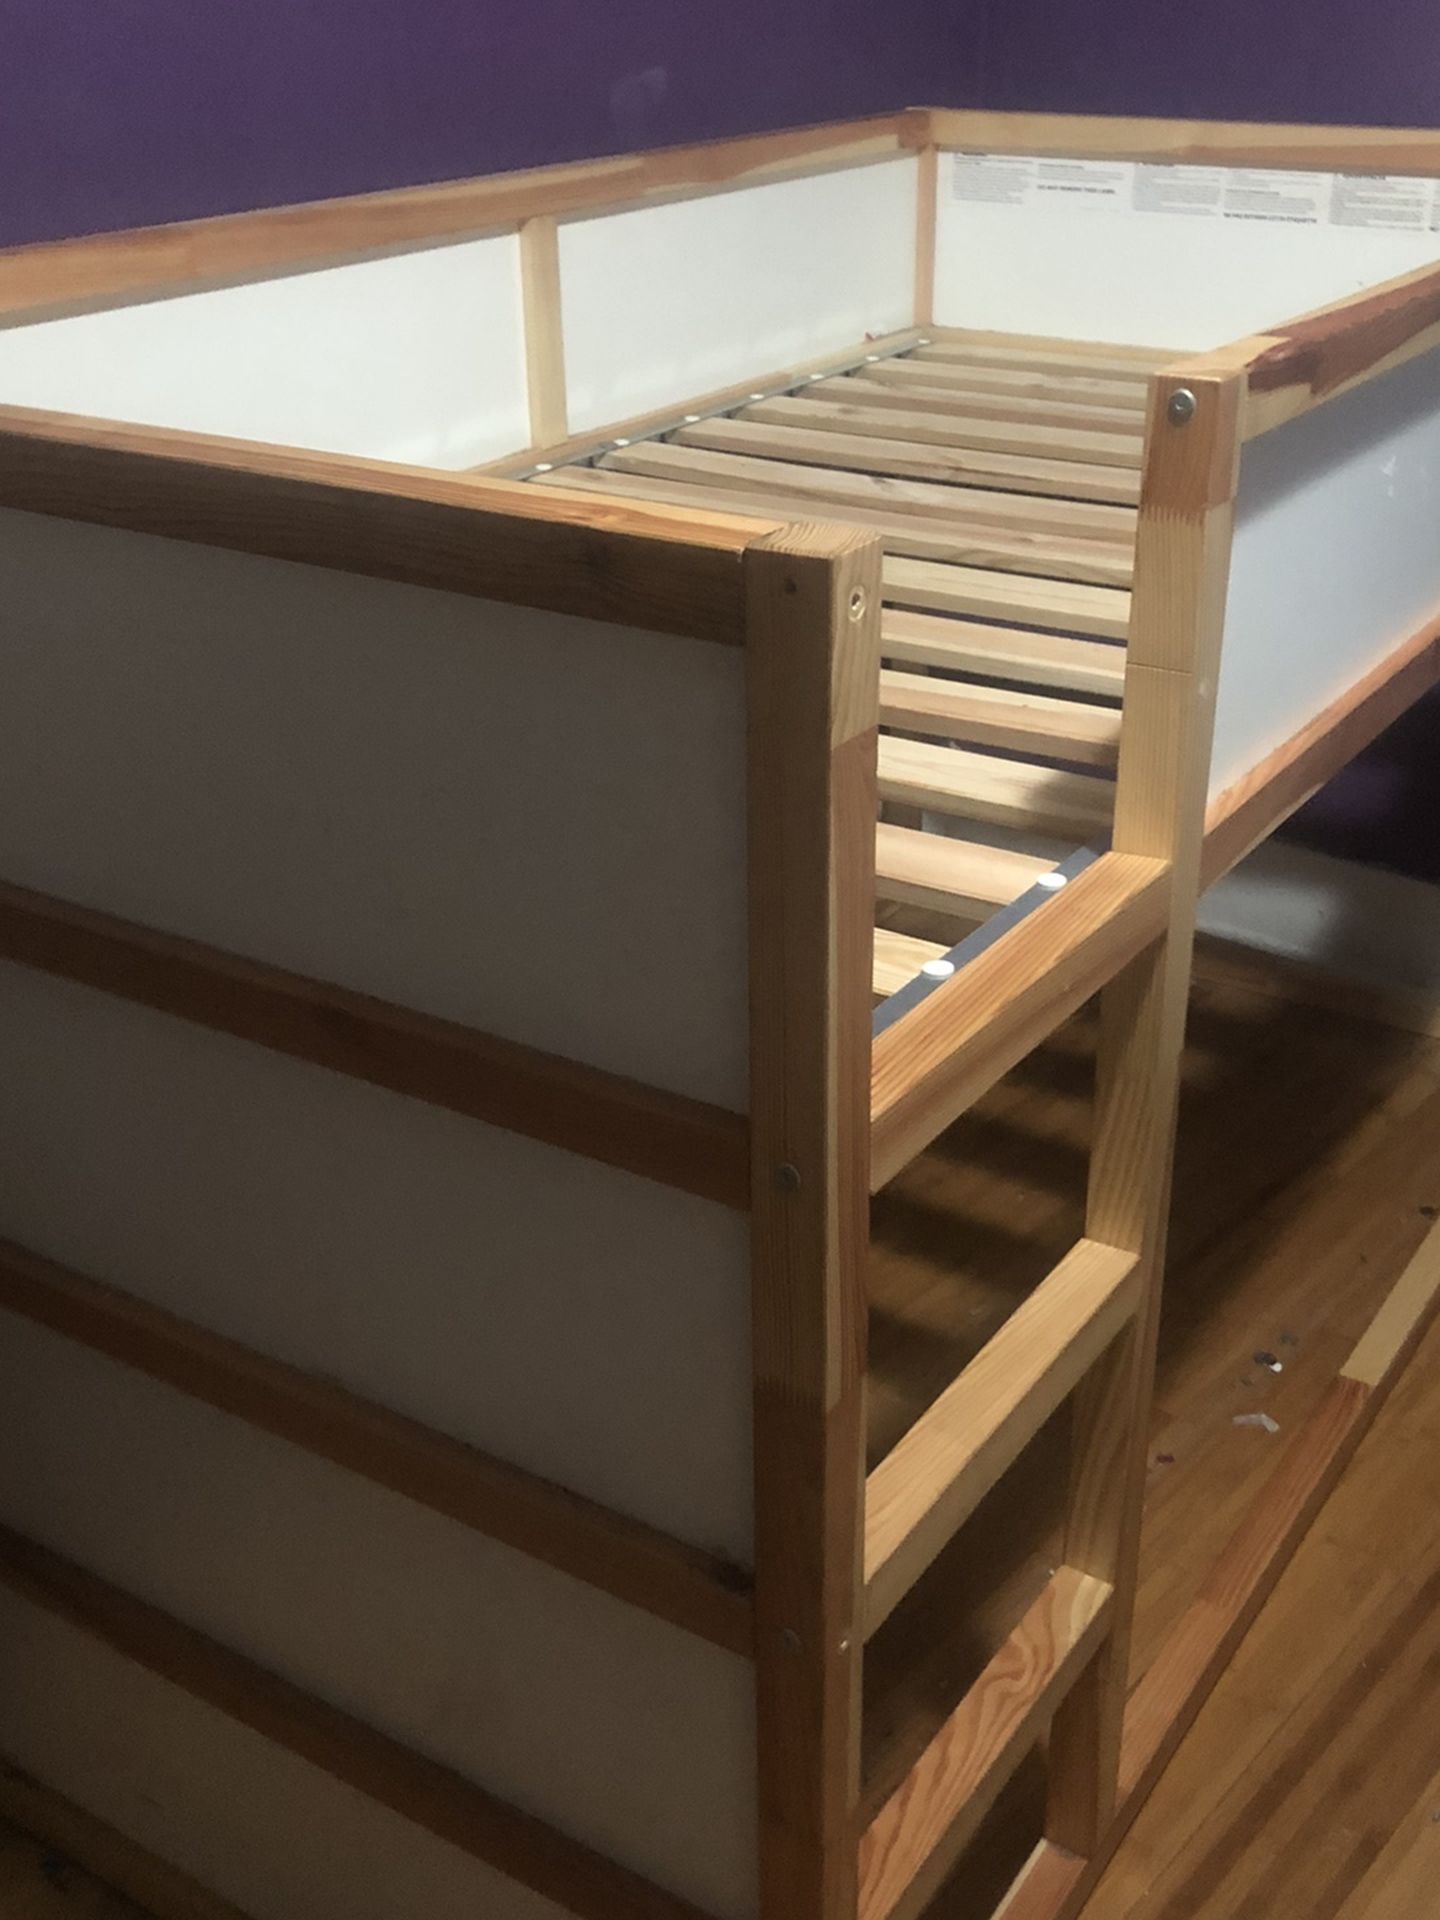 IKEA Kids Bed With Canopy